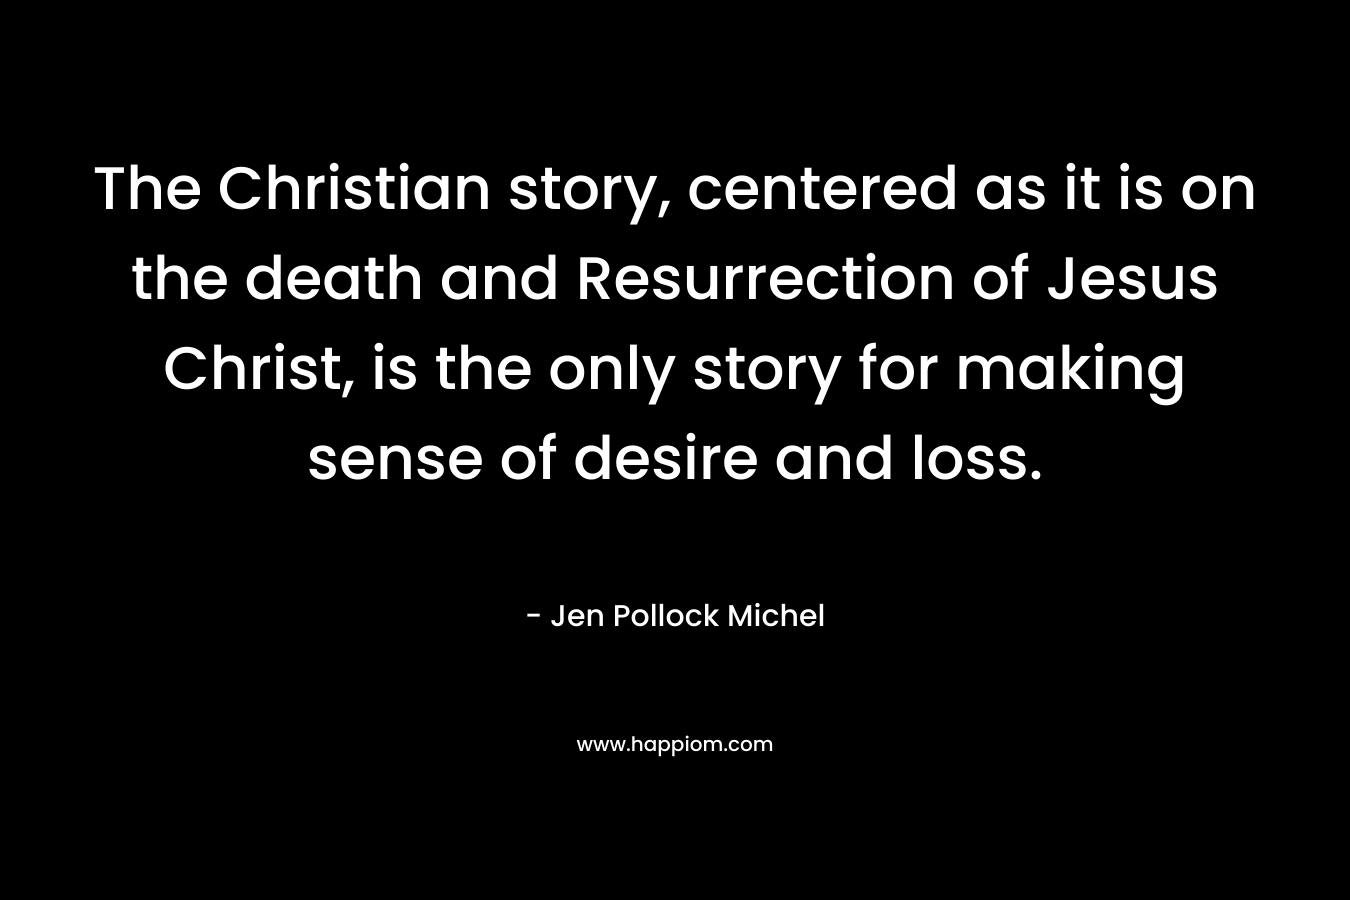 The Christian story, centered as it is on the death and Resurrection of Jesus Christ, is the only story for making sense of desire and loss. – Jen Pollock Michel